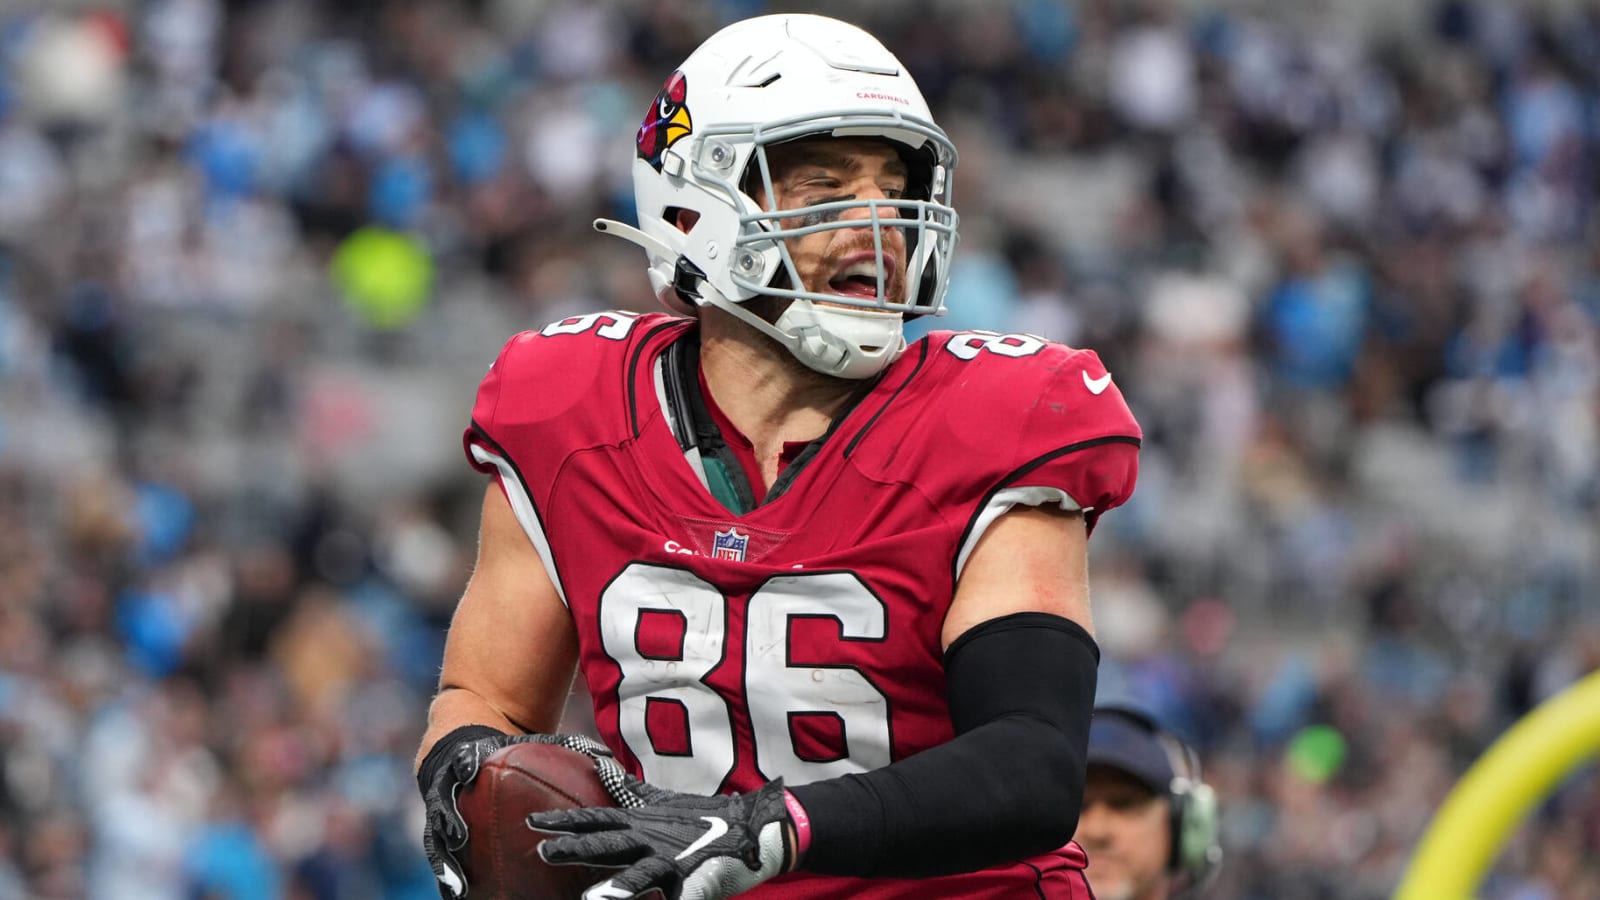 Cardinals' Zach Ertz done for the season with knee injury